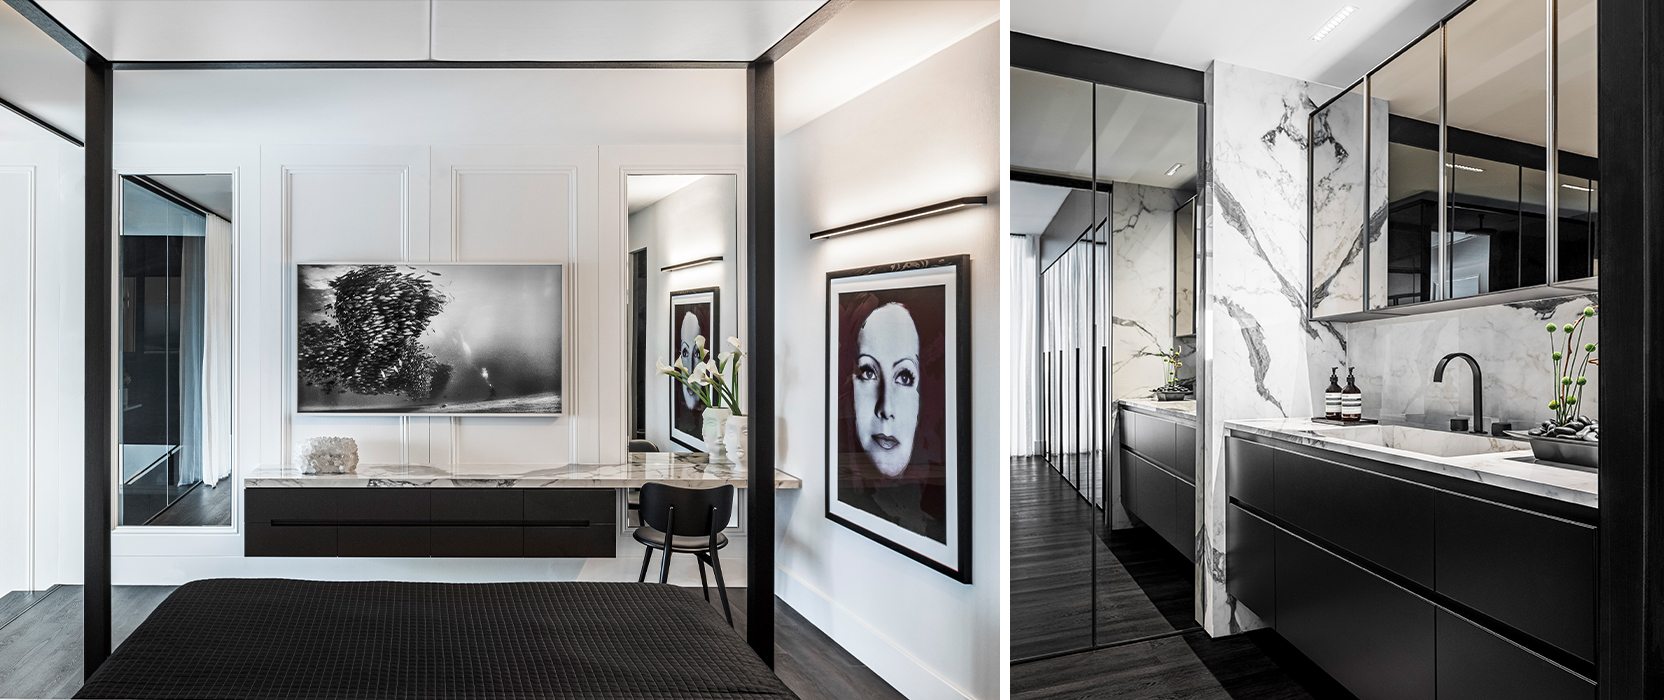 Black and white color scheme throughout residential interior with white walls, black furnishings, black and white photography and wall art, and marble accents.